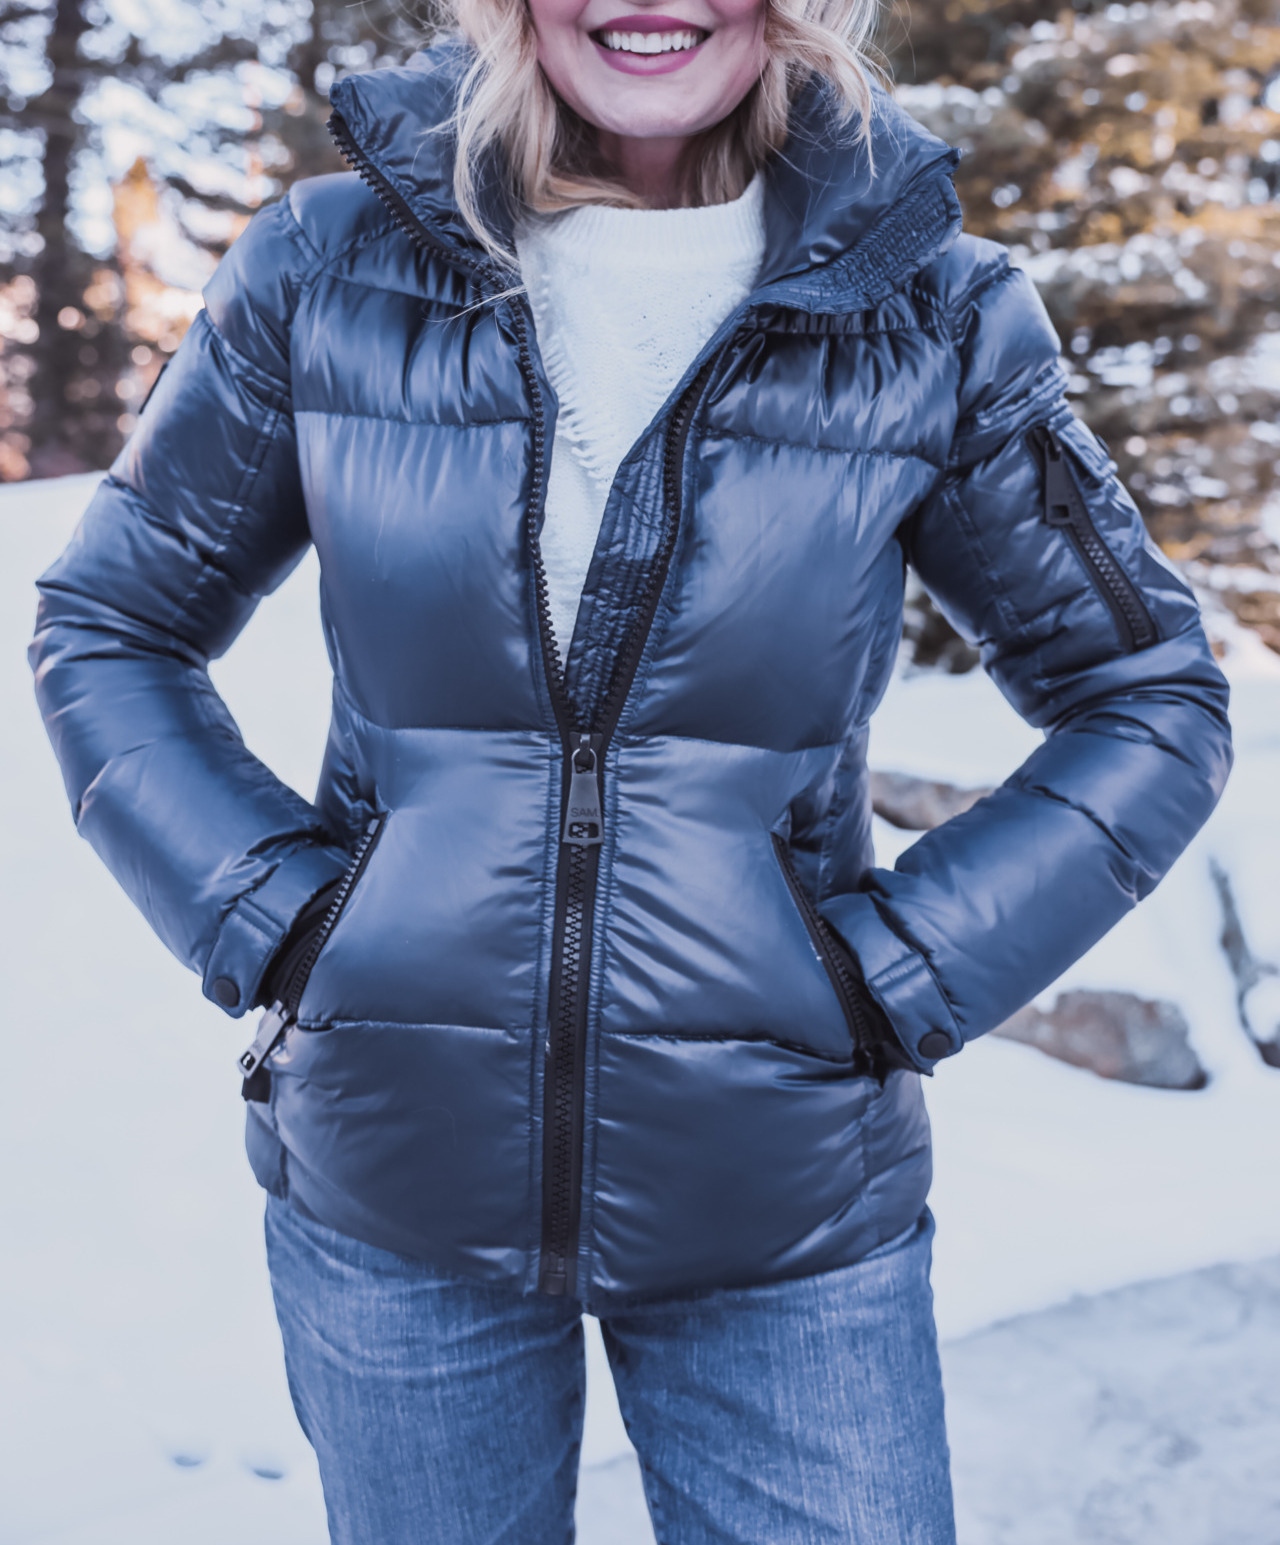 best coats for winter, best jackets for winter, best coats and jackets for winter, womens coats and jackets, womens warm winter coats, best winter coats for women, best winter coats 2022, best womens winter coats for extreme cold, luxury winter jacket brands, winter coats women, best womens winter coats 2022, best winter jackets for extreme cold, erin busbee, busbee style, fashion over 40, telluride, Colorado, ag ex-boyfriend jeans, see by chloe mallory shearling lined chelsea boots, white fringe milly sweater, black SAM freestyle puffer jacket